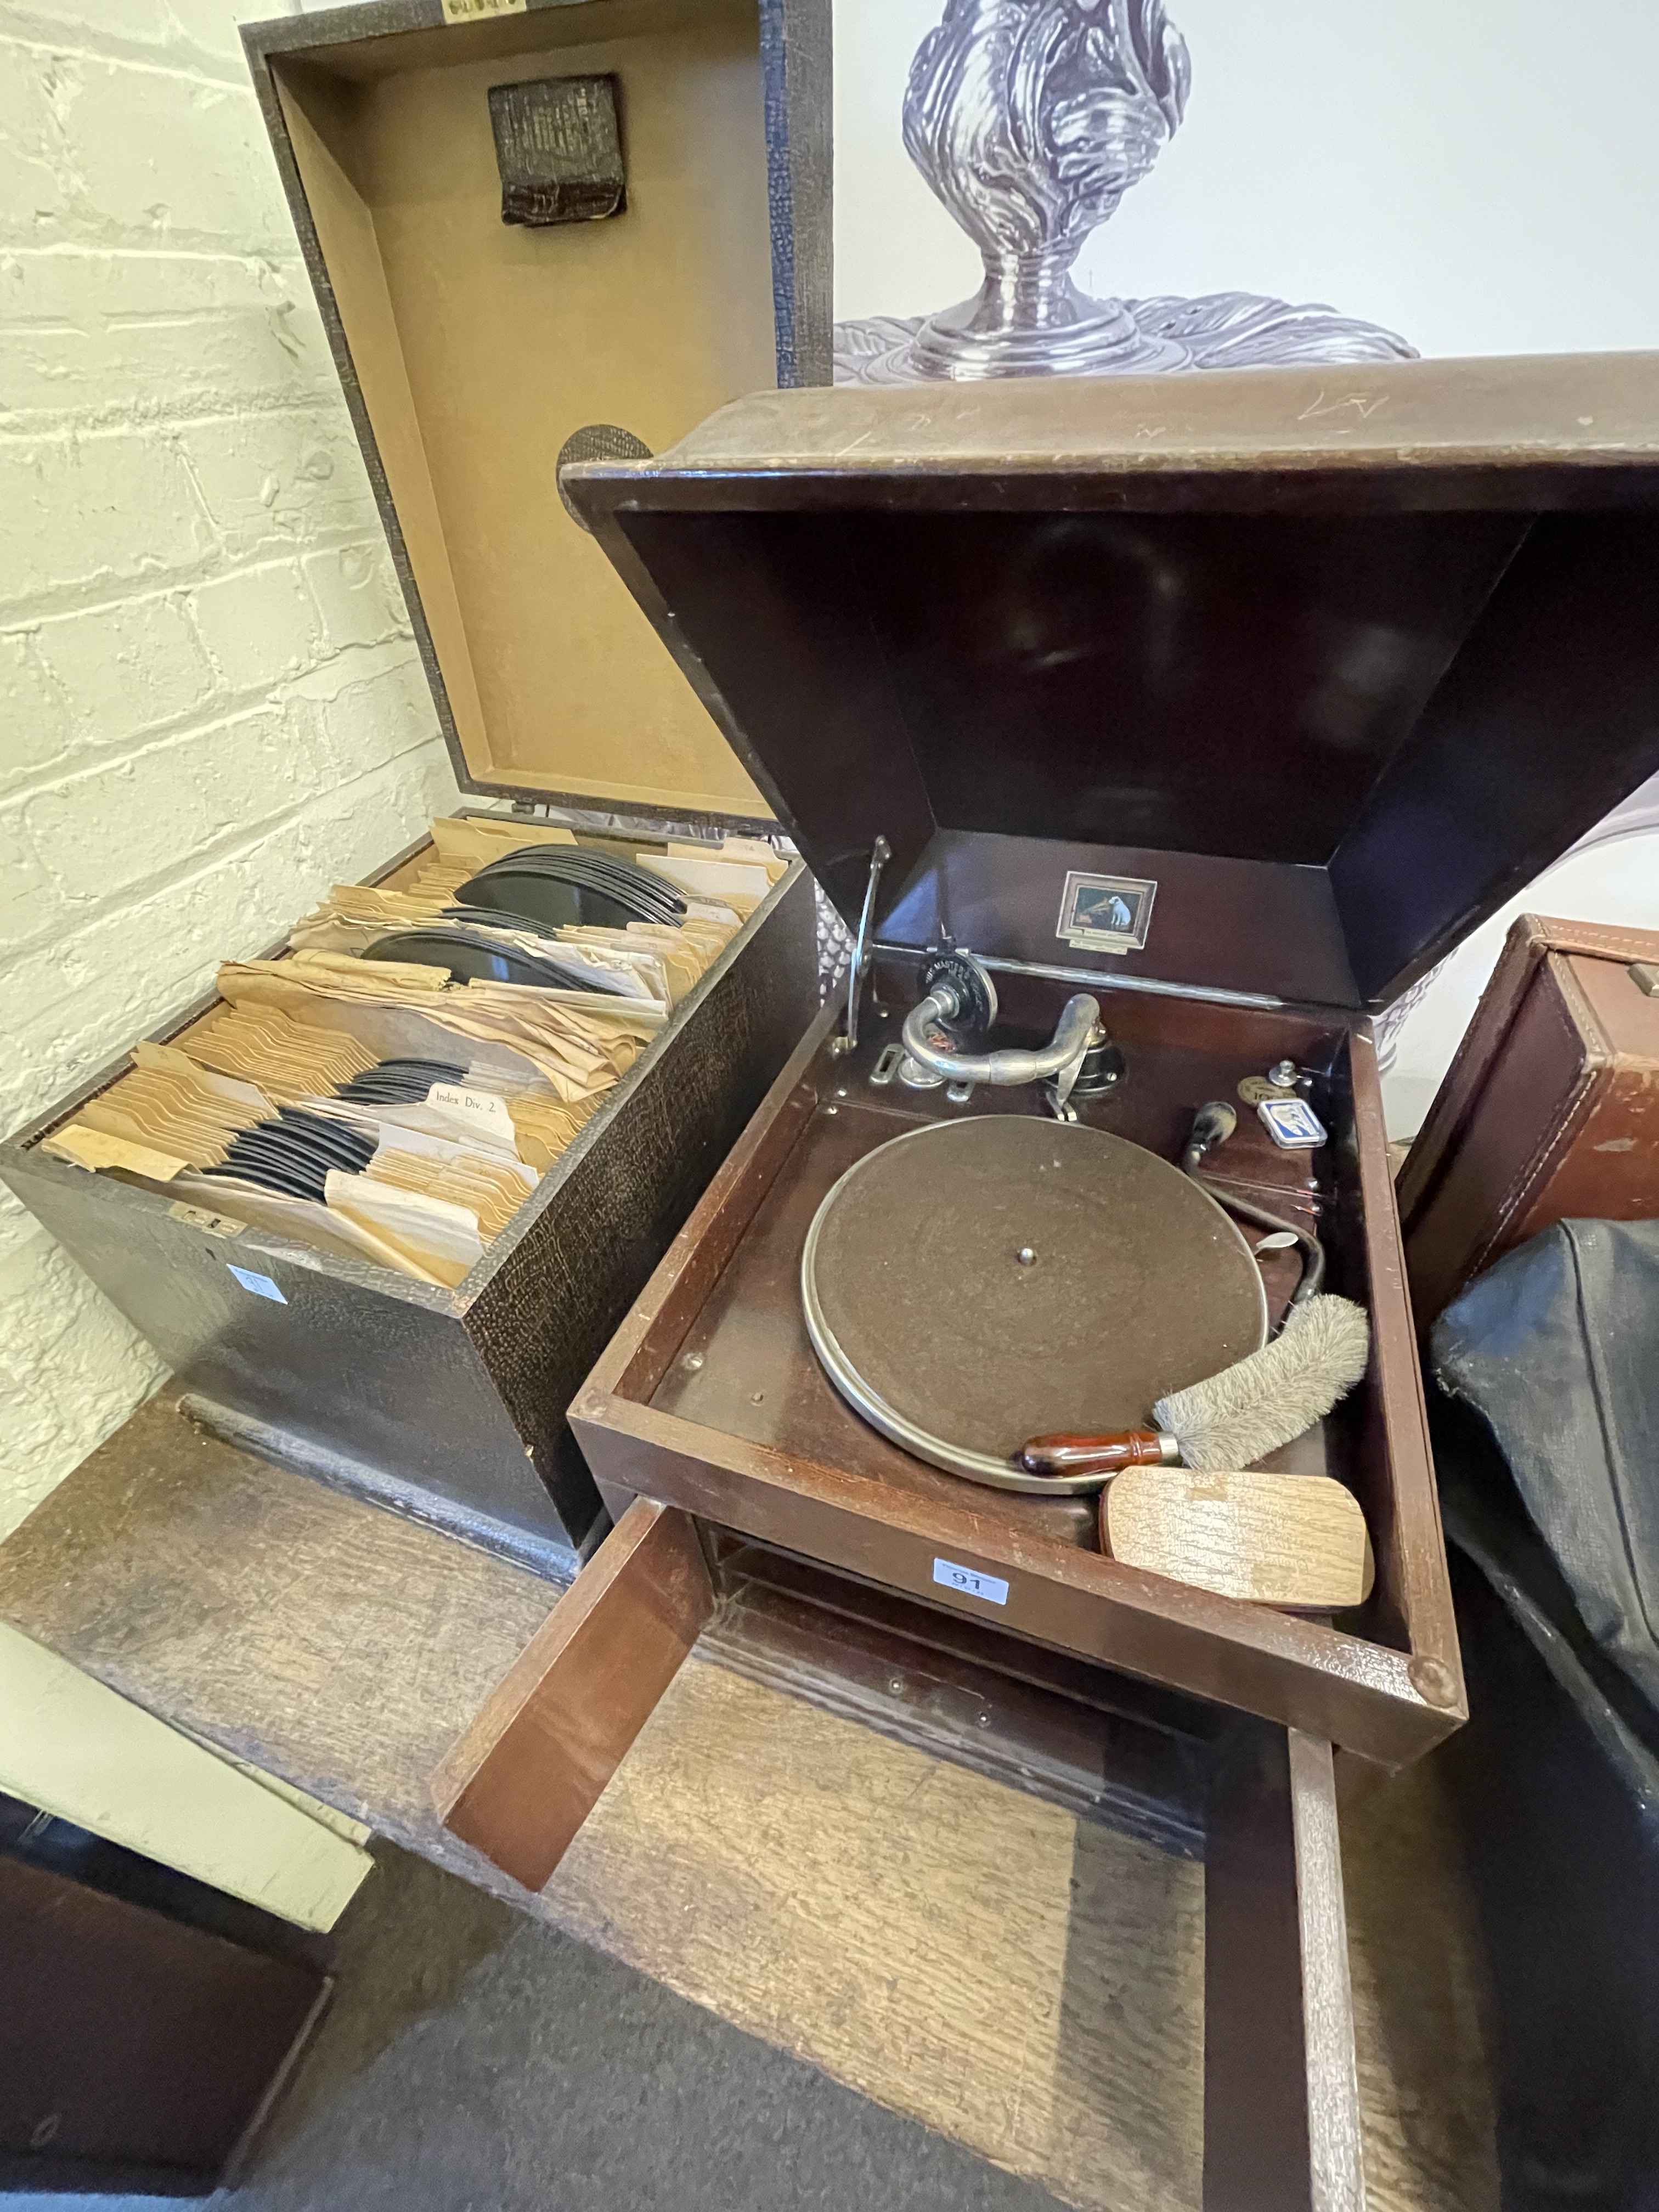 HMV table top gramophone and collection of 78 records, vintage case and LC Smith typewriter. - Image 2 of 2